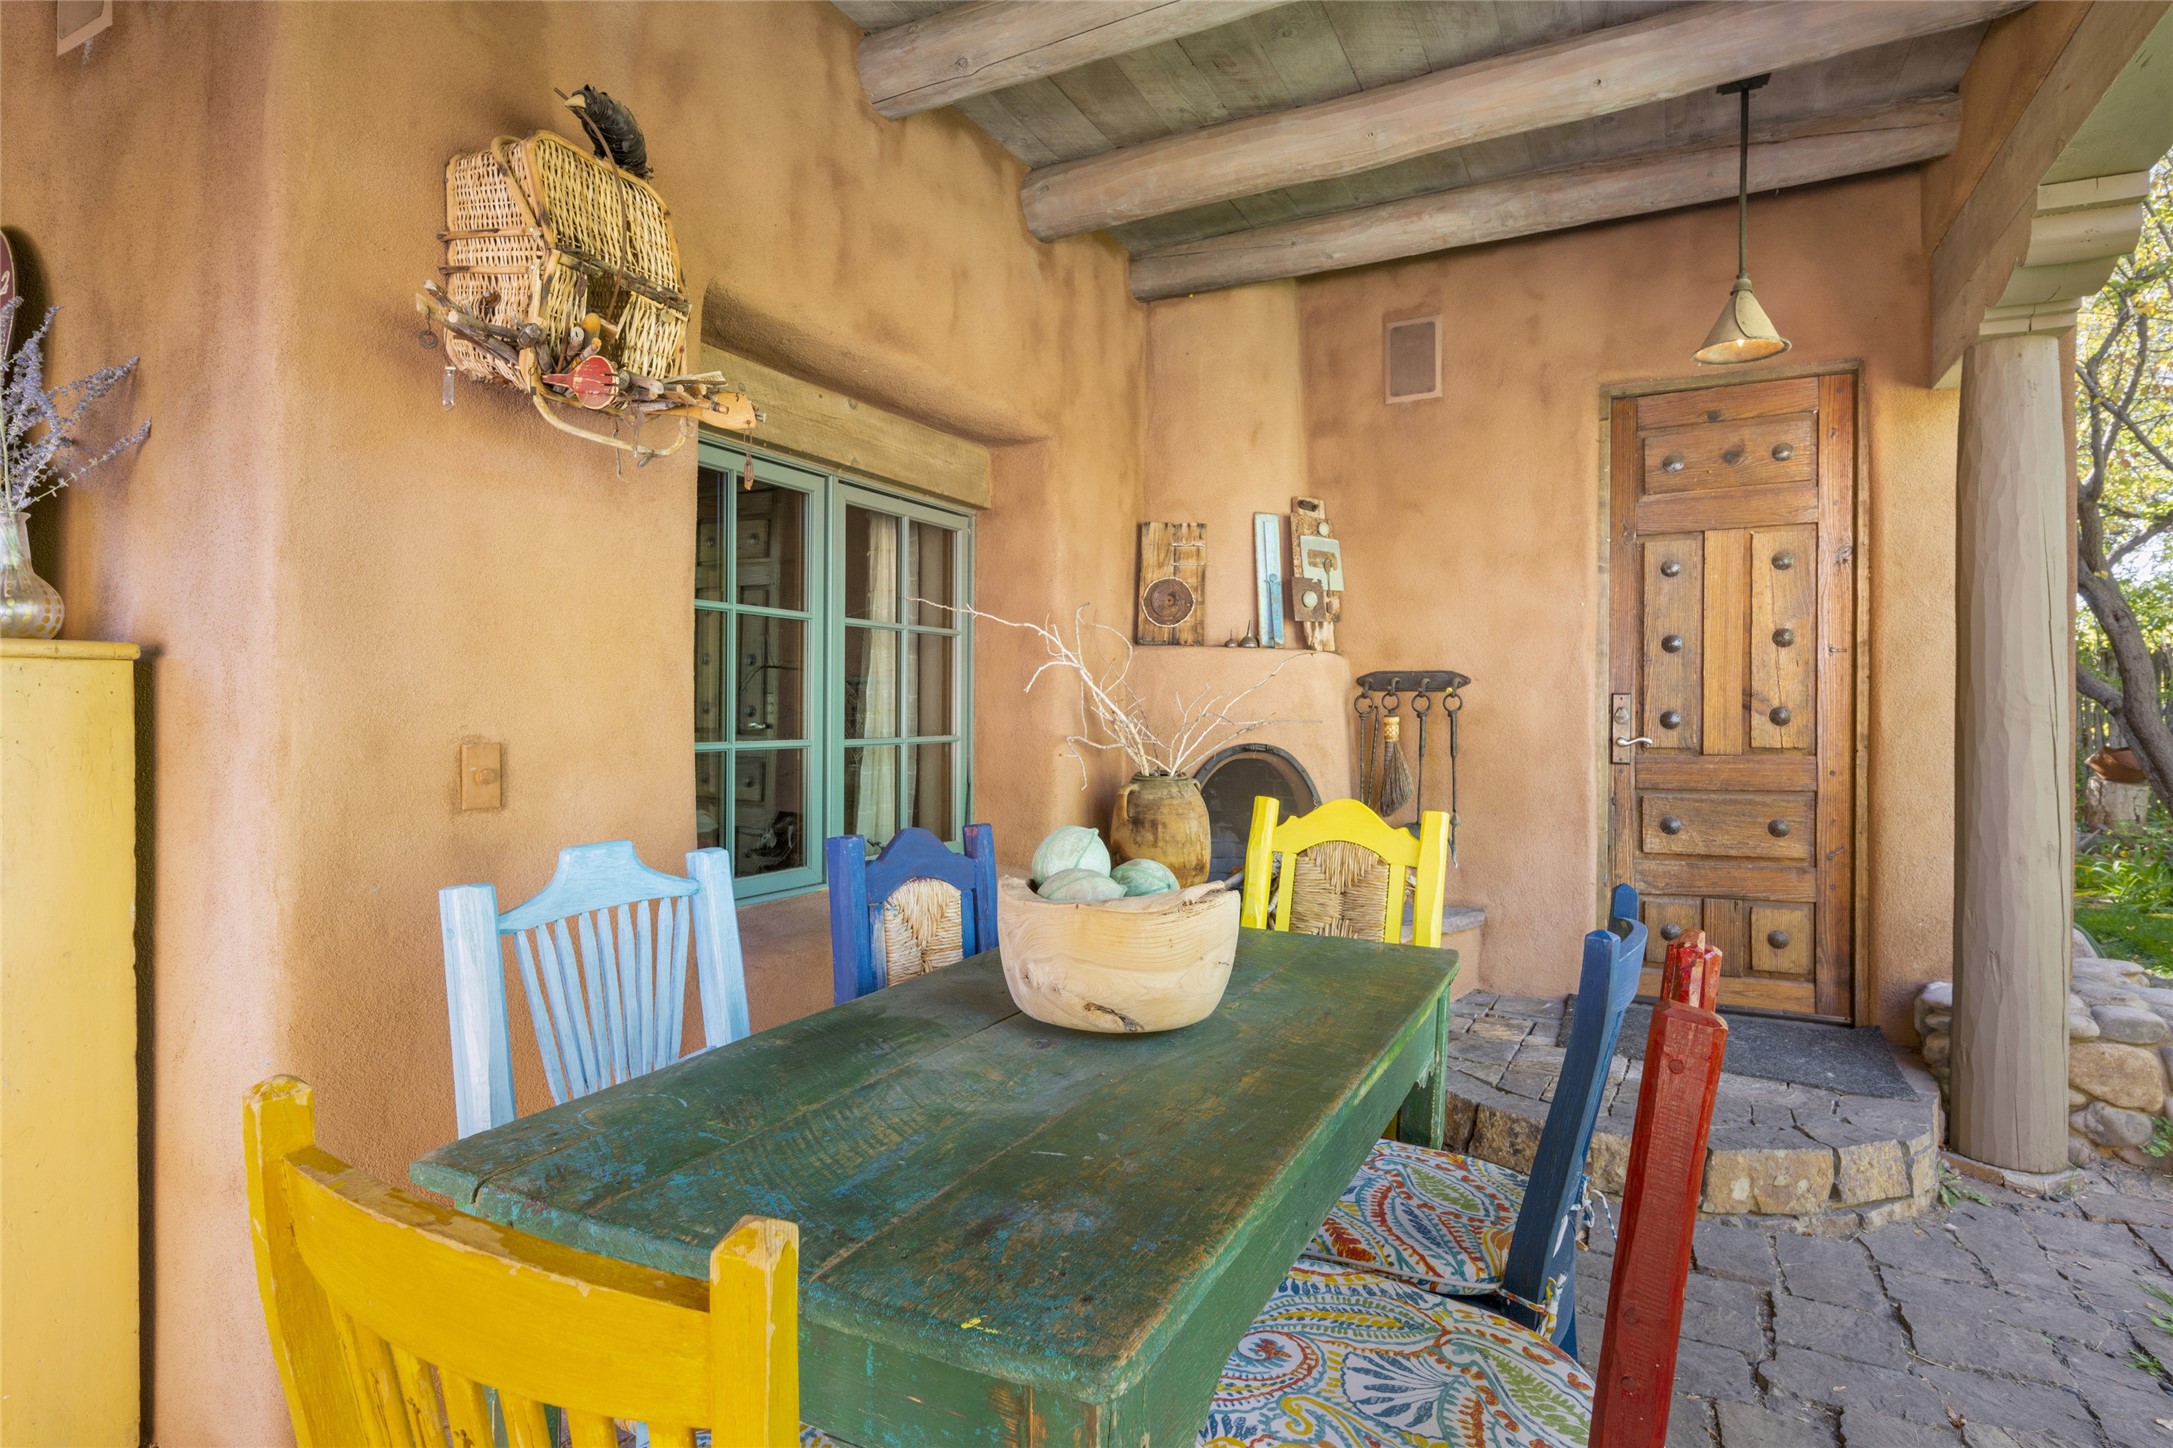 1003 & 1005 Canyon Road, Santa Fe, New Mexico 87501, 6 Bedrooms Bedrooms, ,6 BathroomsBathrooms,Residential,For Sale,1003 & 1005 Canyon Road,202233499